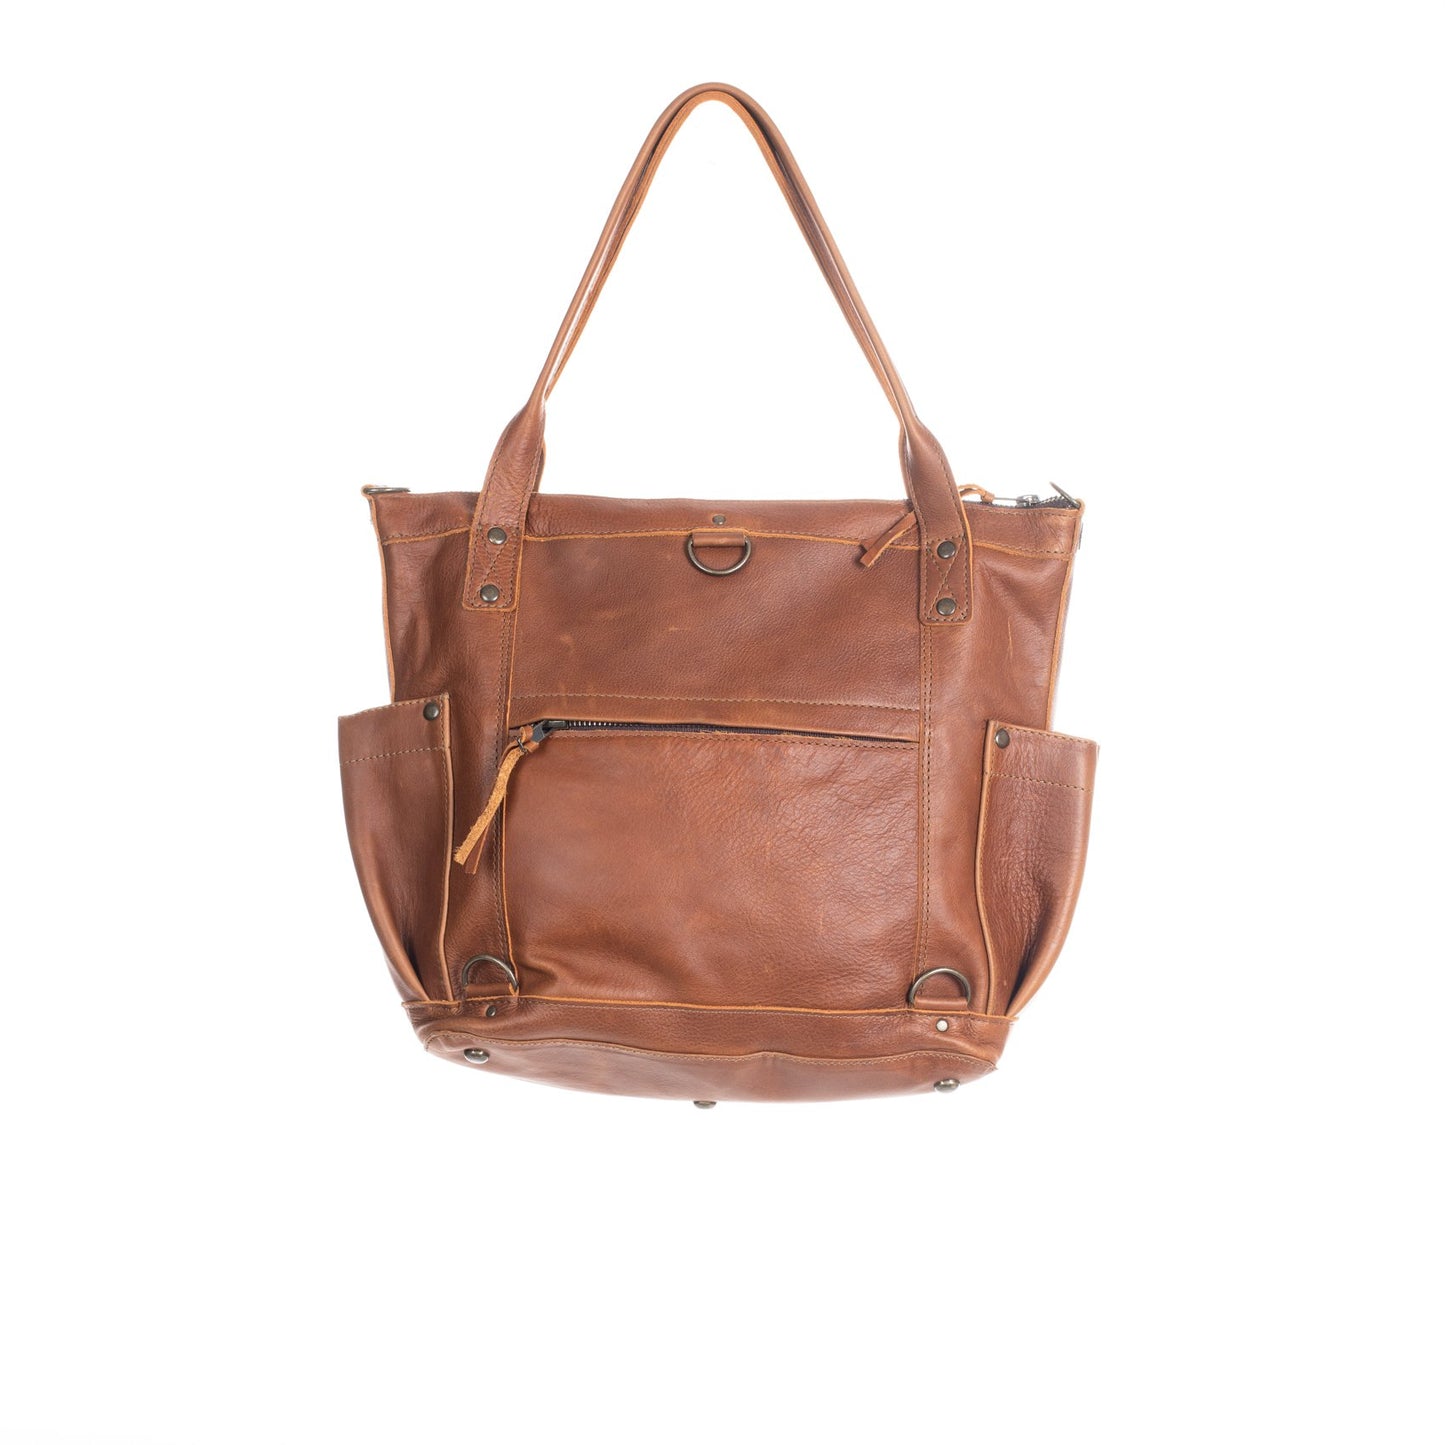 HERITAGE & SOCIETY - CIELO - THE PERFECT BAG MEDIUM - CAFE LEATHER